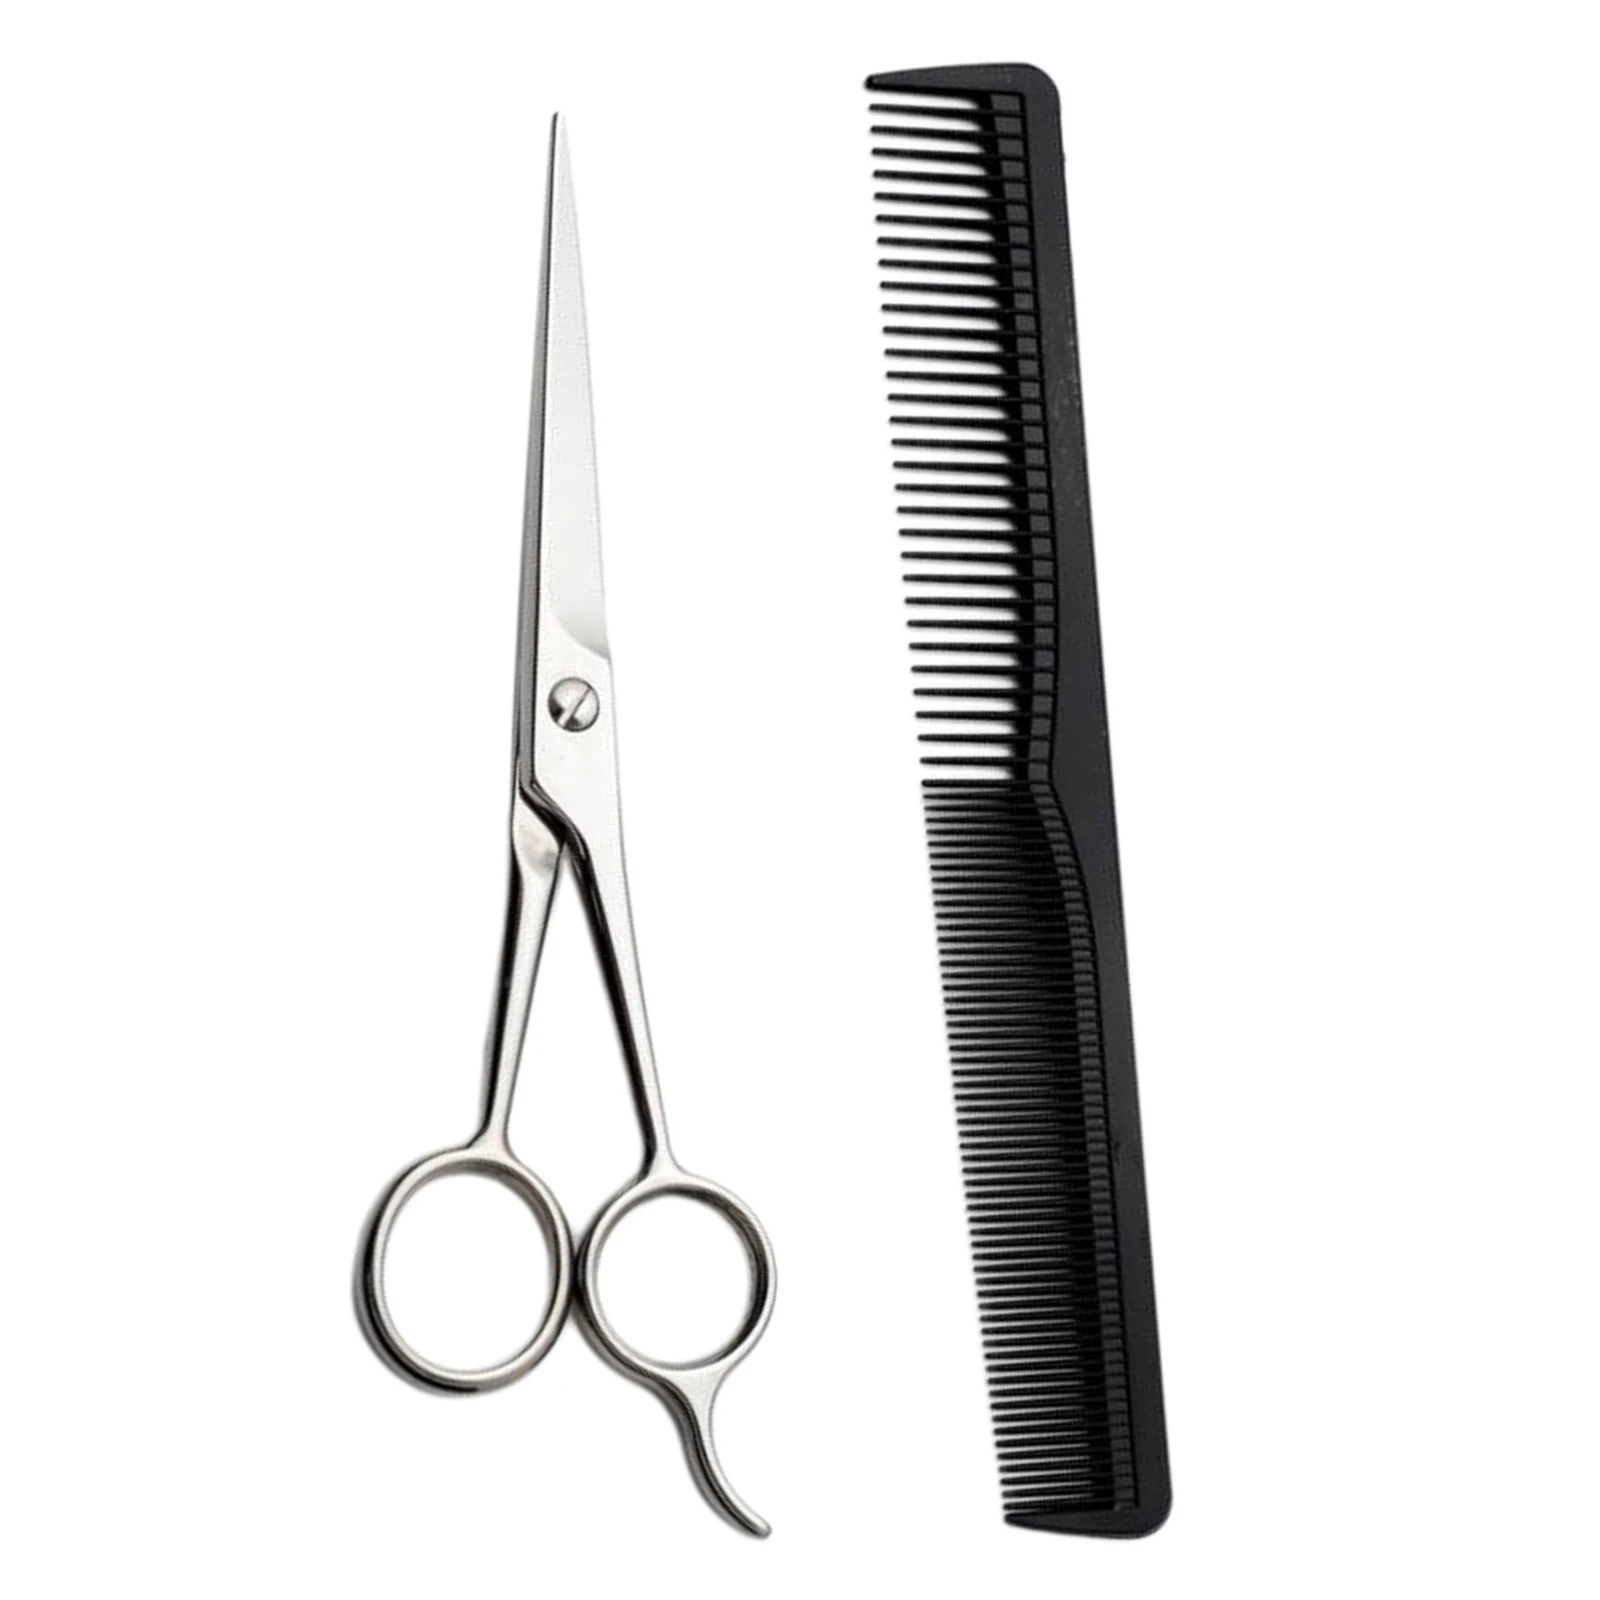 Hair Cutting Scissors 6.5 Overall Length Hairdressing Shears with Comb Hair Scissors Cutting Shears Hairdressing Comb